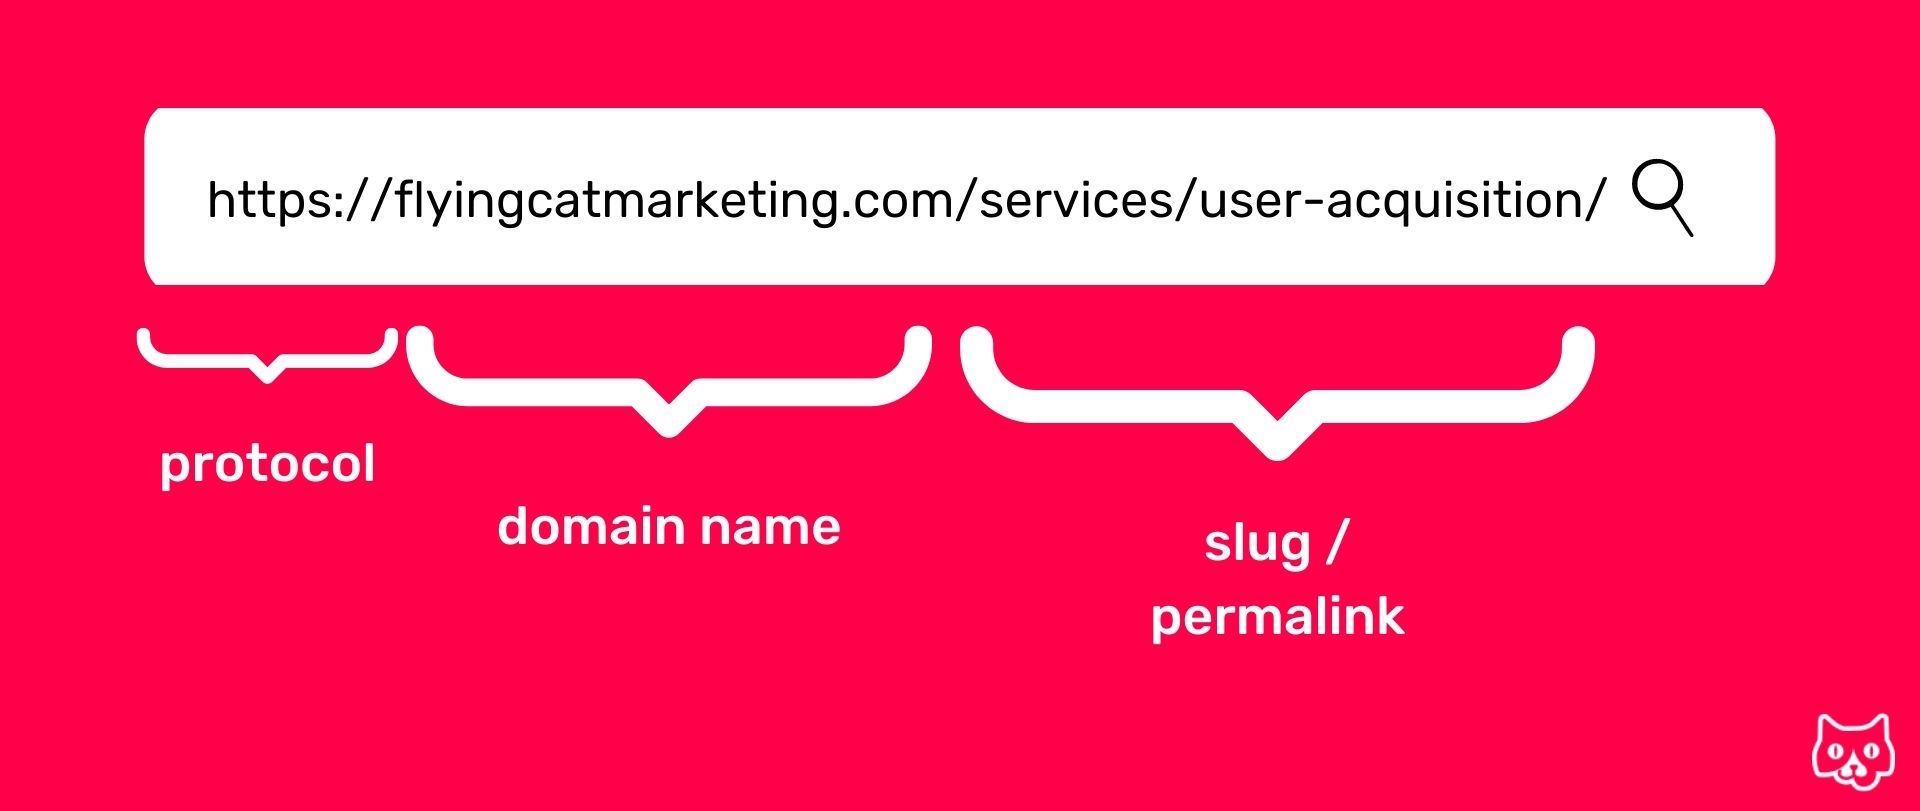 This image is the Flying cat marketing red background with a white search bar and the link to the user acquisition page on the FCM website. The URL has been labeled to show the first part is the protocol, the second is the domain name, and the third is the slug / permalink.